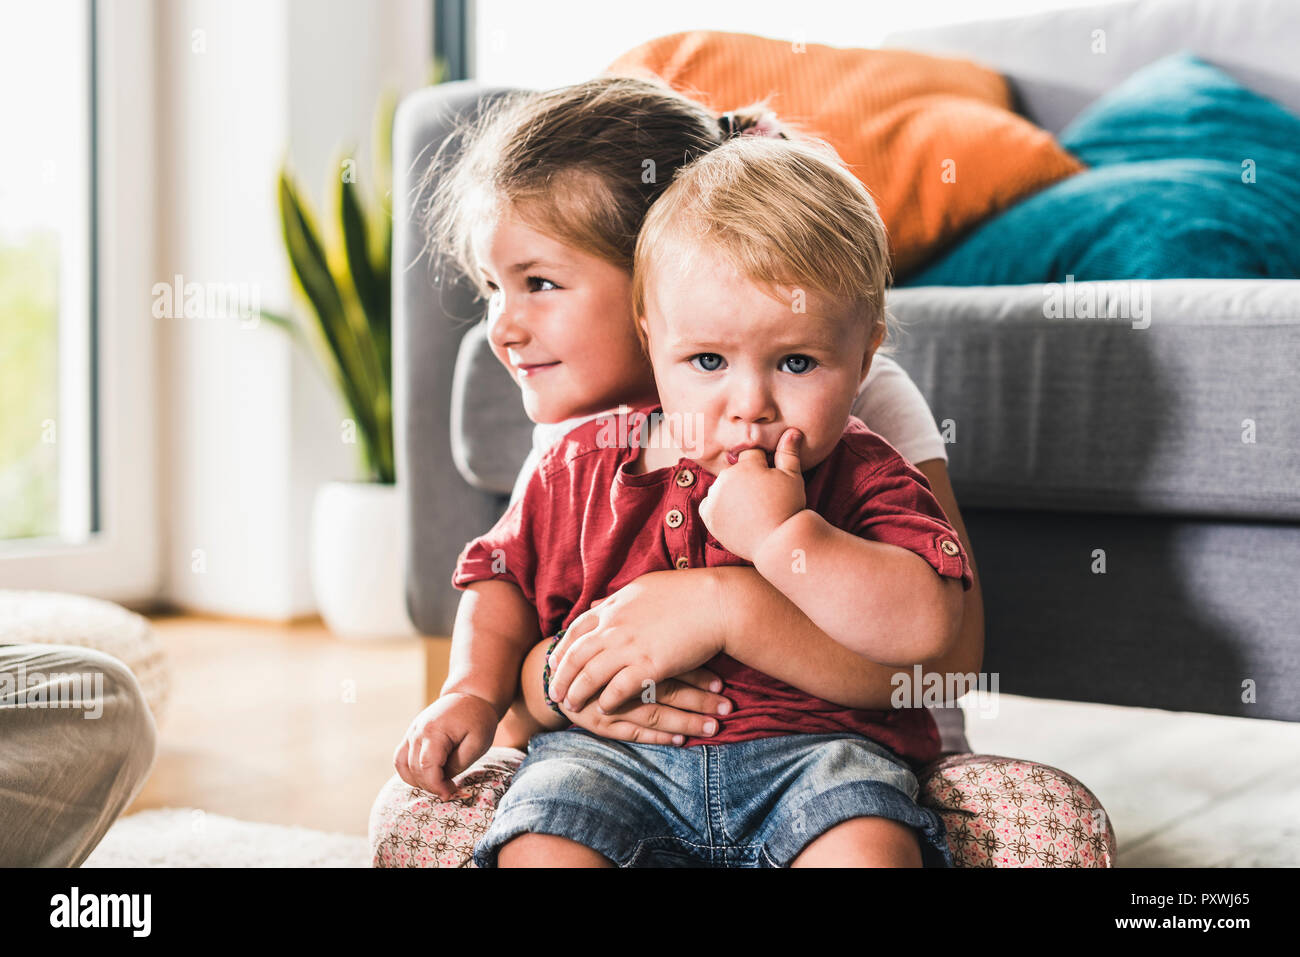 Brother and sister at home in living room Stock Photo